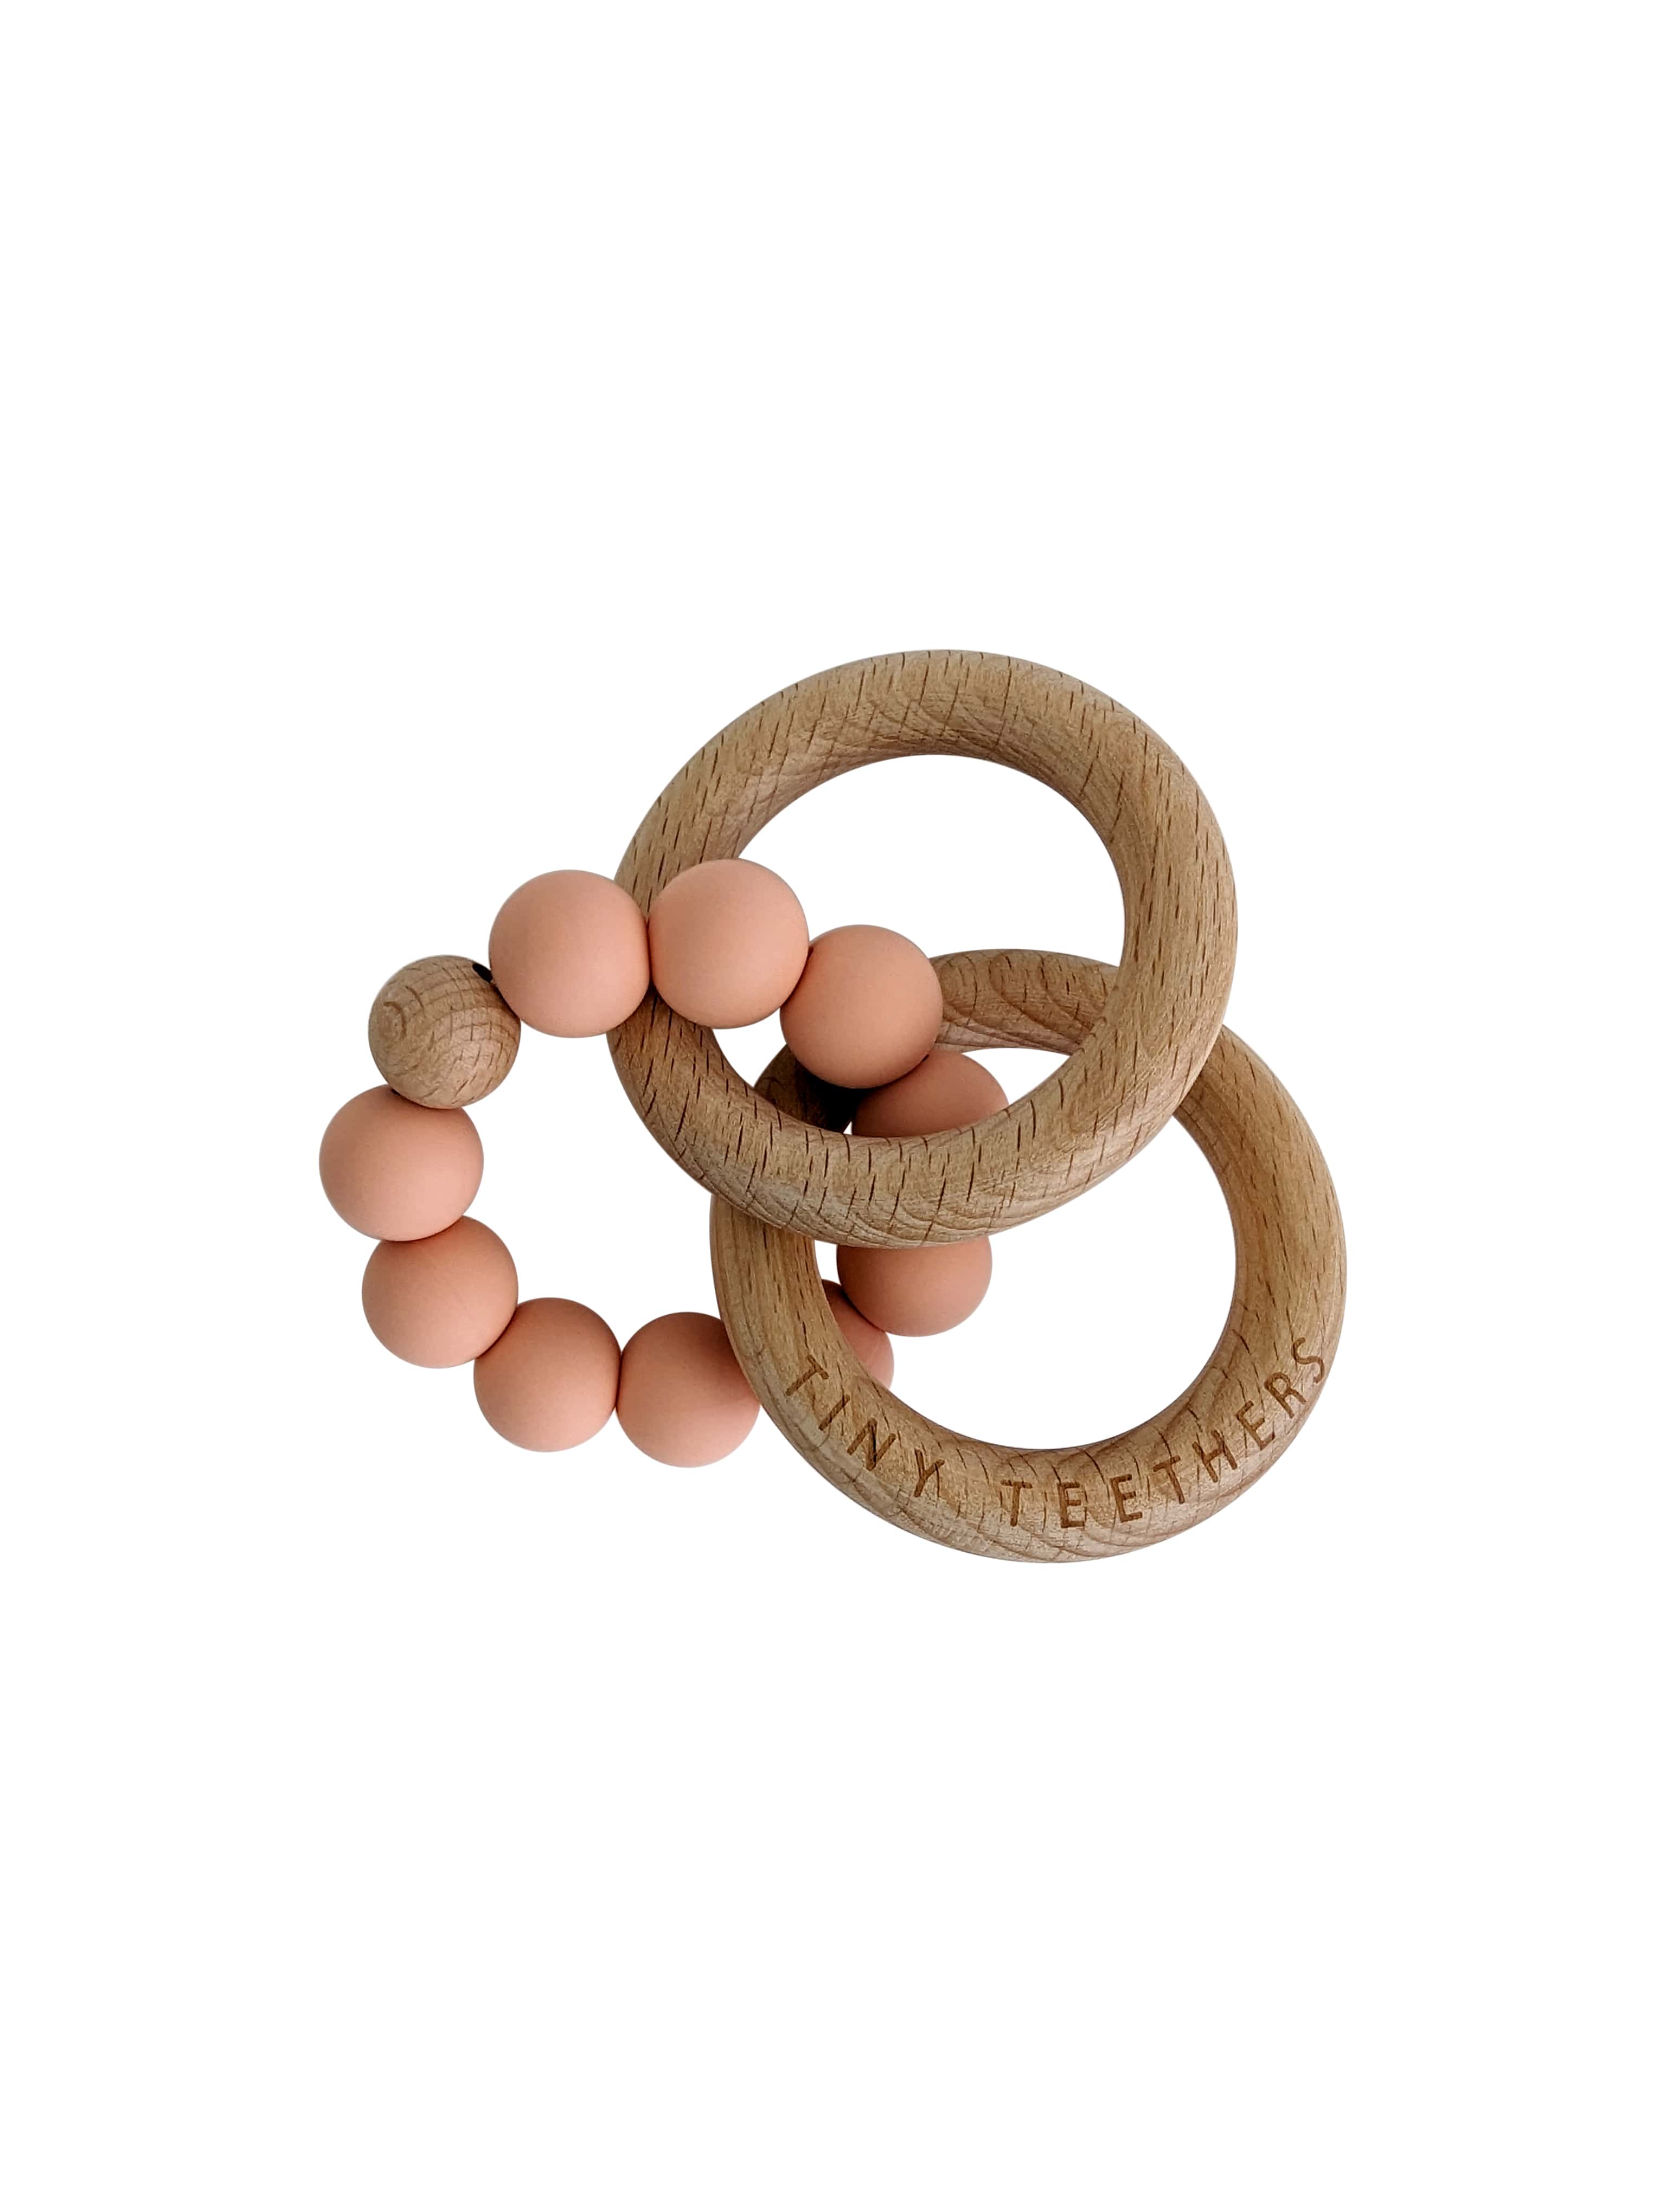 Peach Rattle Teether Rings